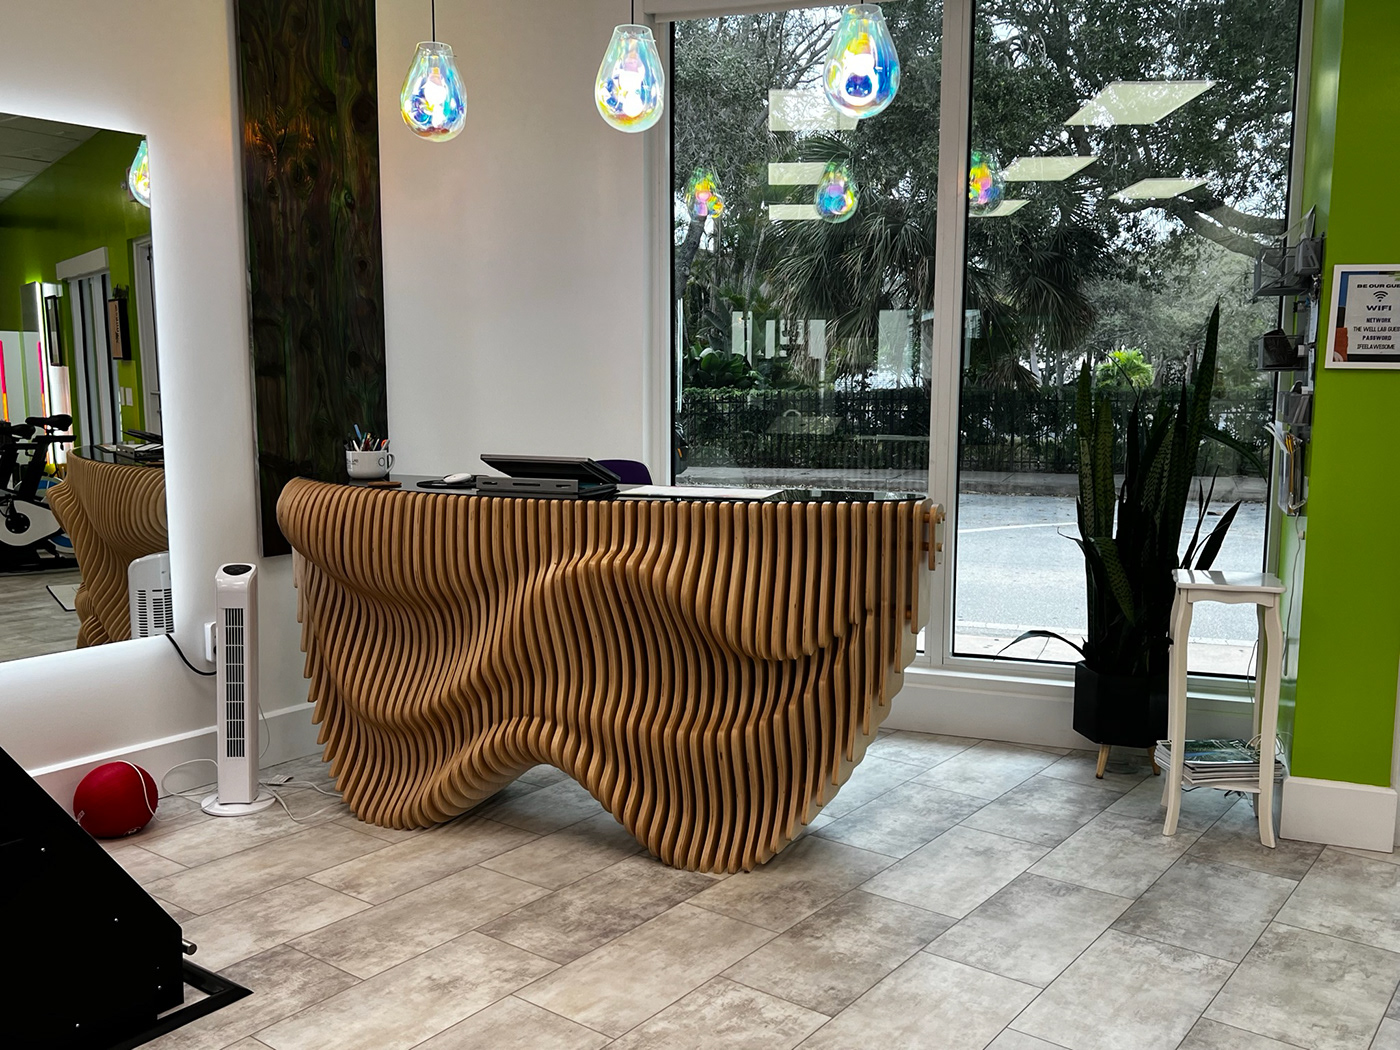 parametric cnc plywood Reception desk modern geometric wooden furniture abstract design ideas lobby bench